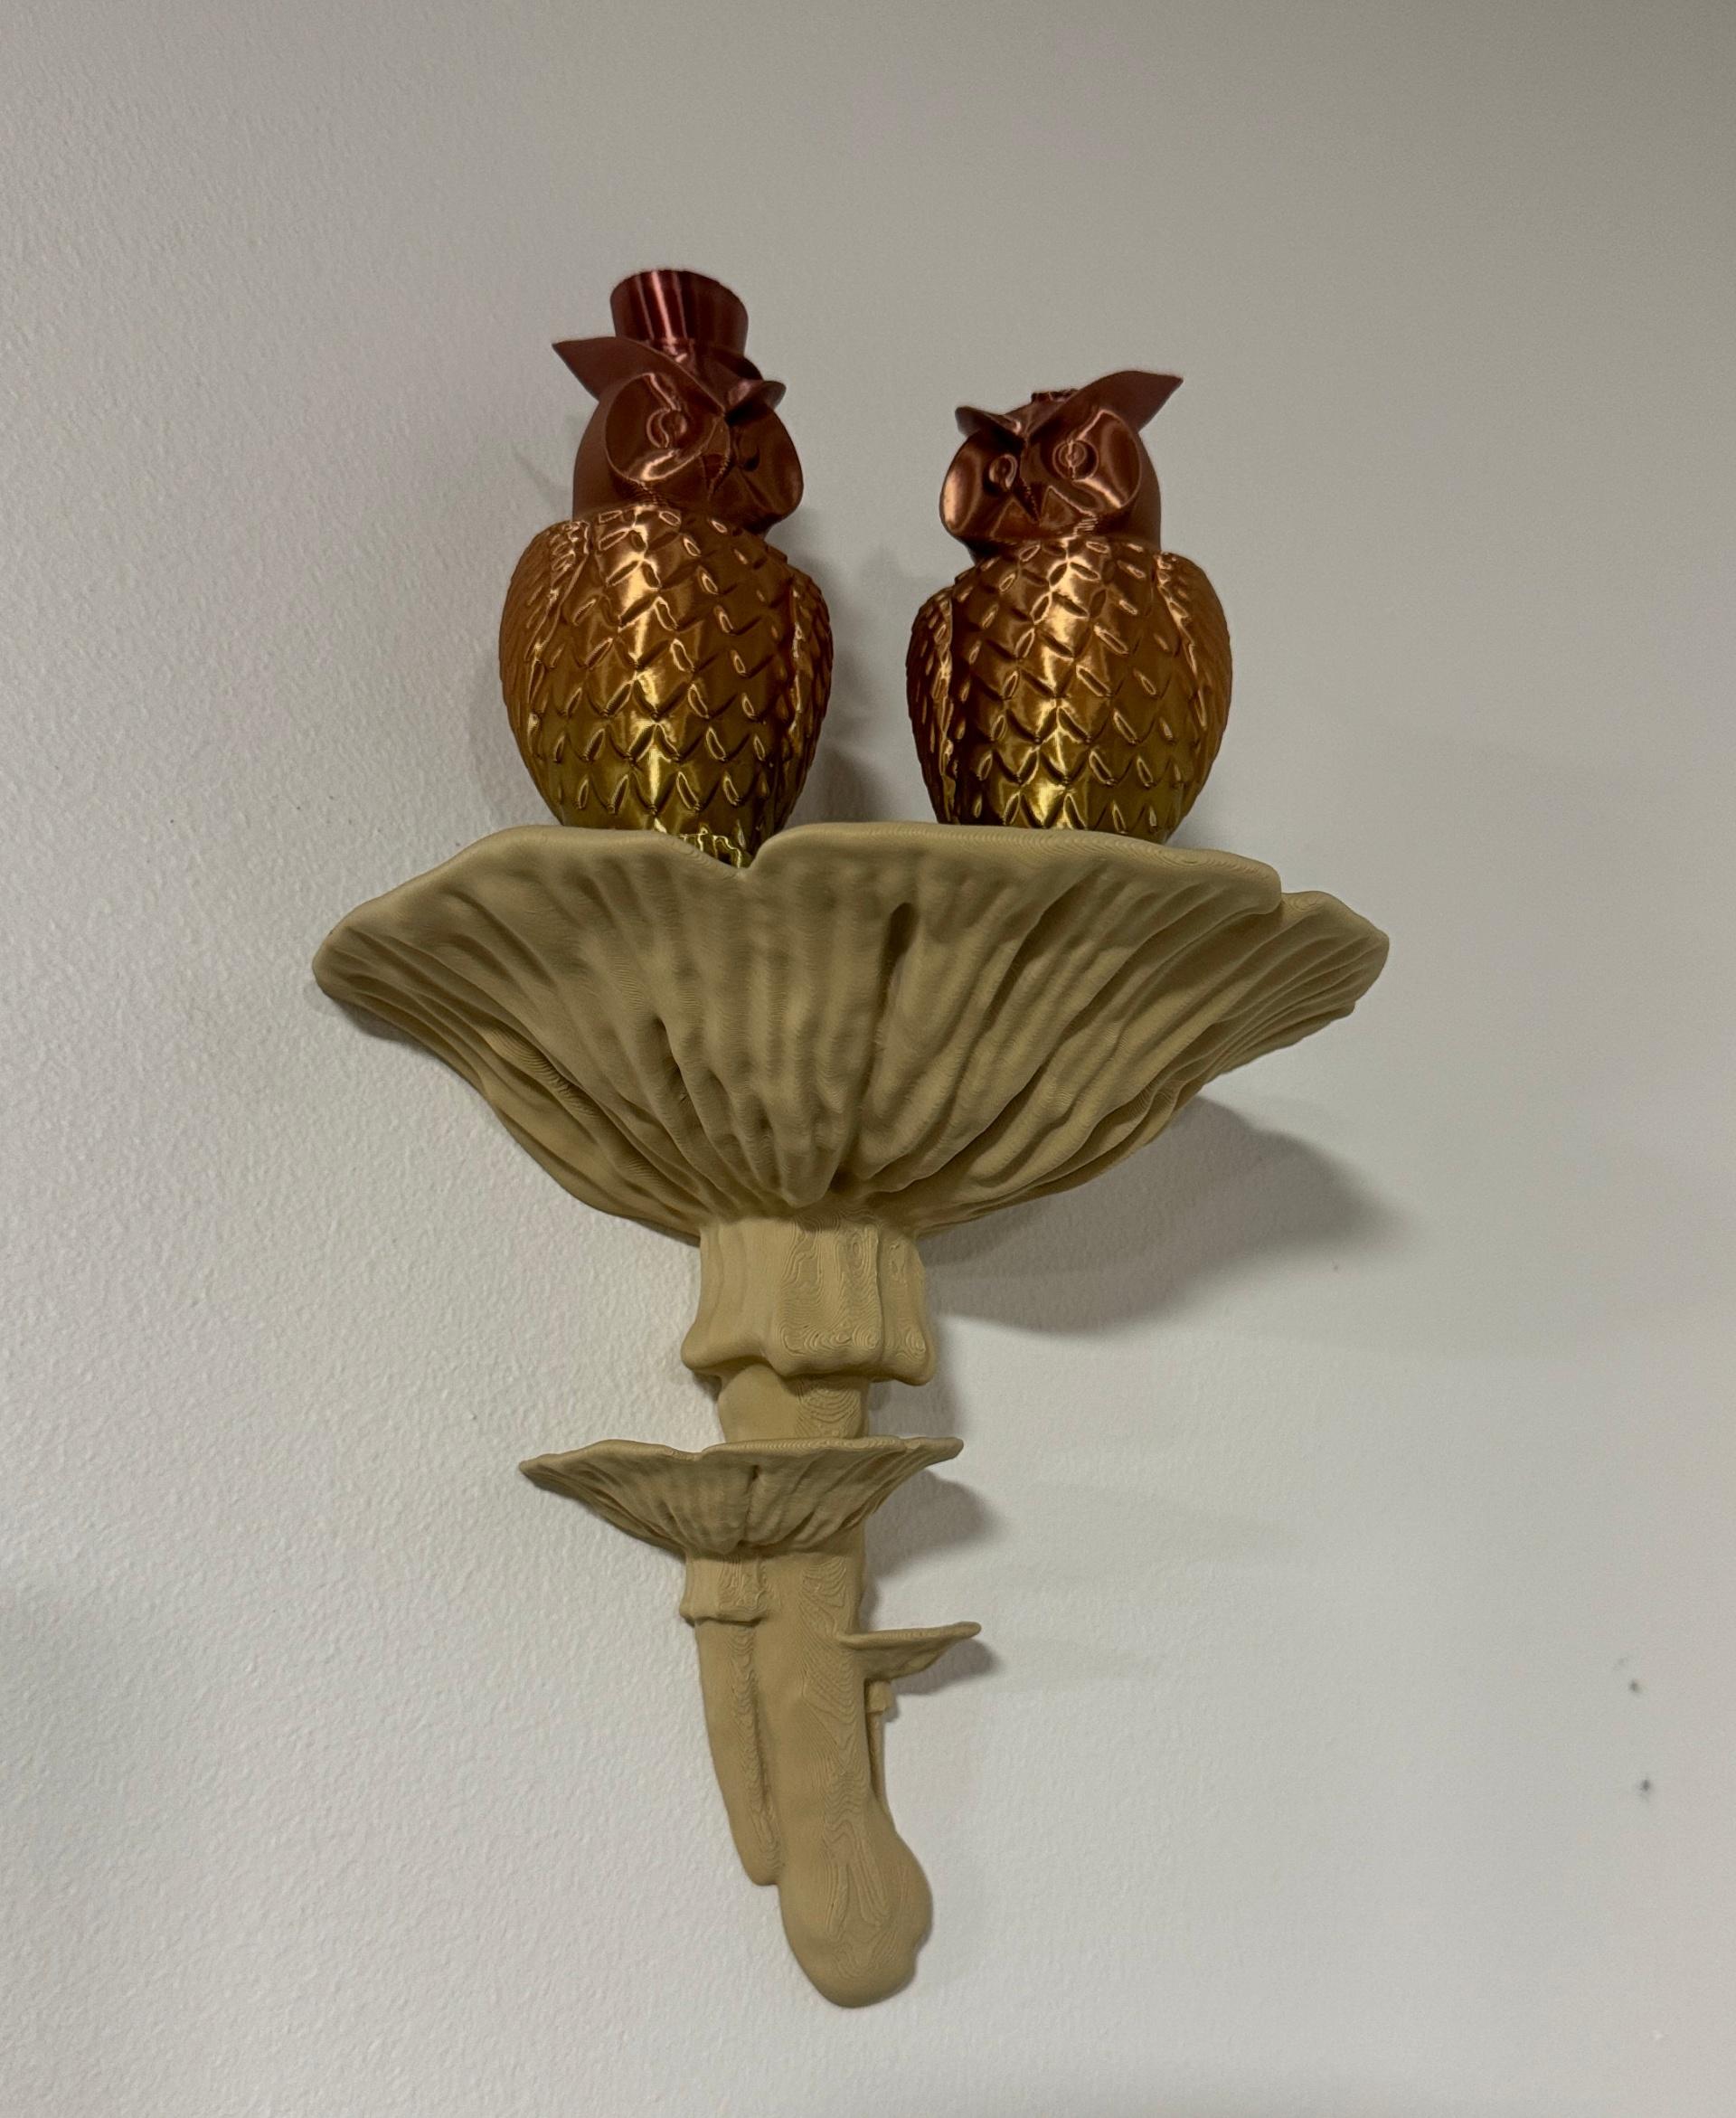 Mushroom shelf “Amanita Caesarea” - Very nice model. The print came out wonderful and the bracket is perfect. Thank you for sharing your art! - 3d model